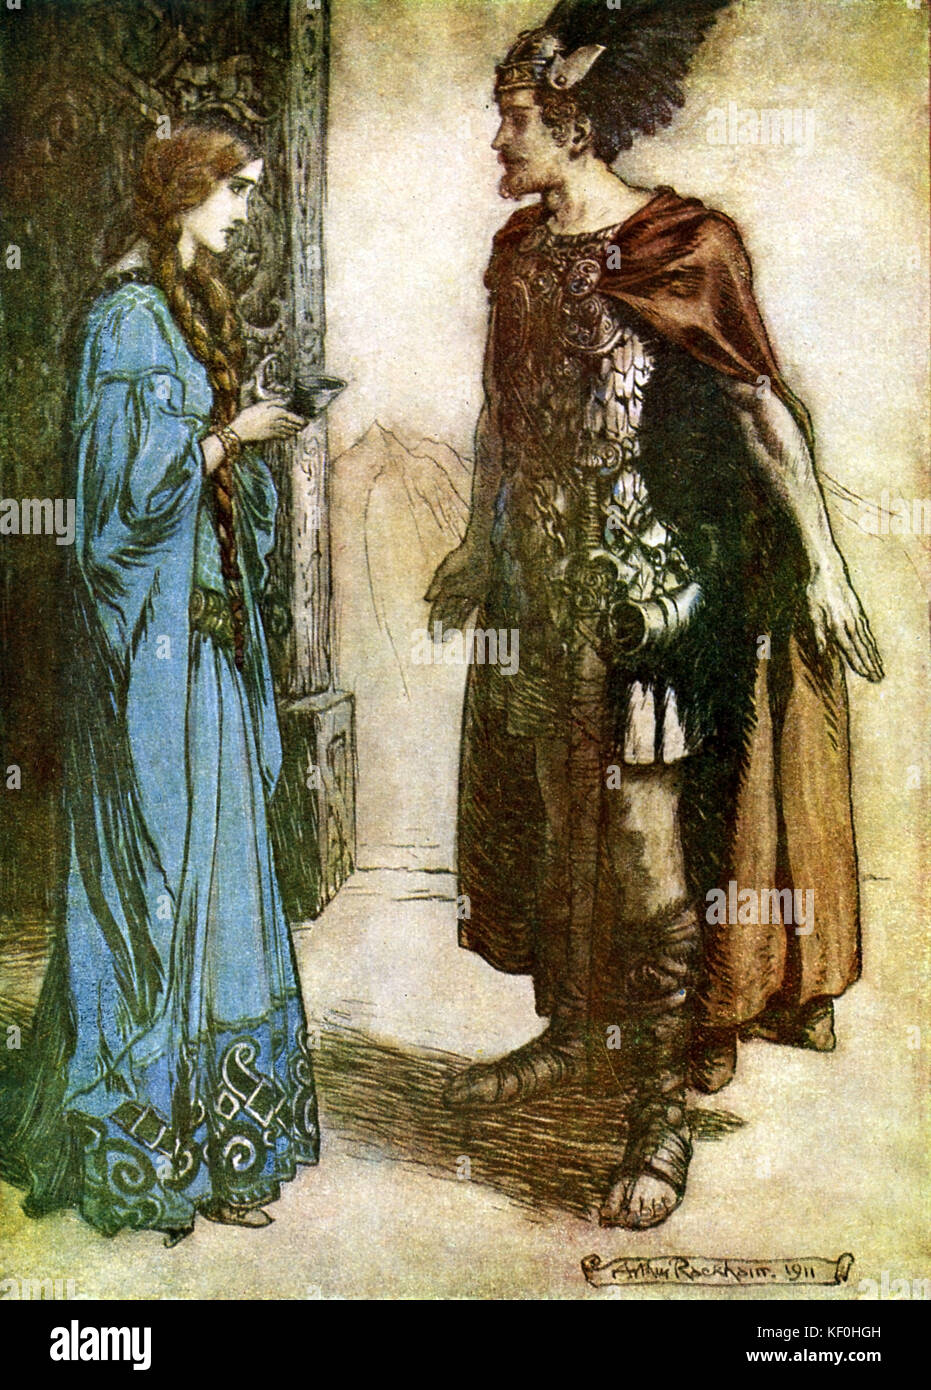 The Twilight of the Gods / Göttterdämmerung by Richard Wagner. Siegfried is drugged by Gutrune causing him to forget Brünnhilde and the Ring.  Illustration by Arthur Rackham 1867 - 1939.  Caption:  'Siegfried hands the drinking-horn back to Gutrune and gazes at her with sudden passion' Act 1.  From 'The Ring Cycle' / 'Der Ring des Nibelungen'.  RW German composer & author, 22 May 1813 - 13 February 1883. Stock Photo